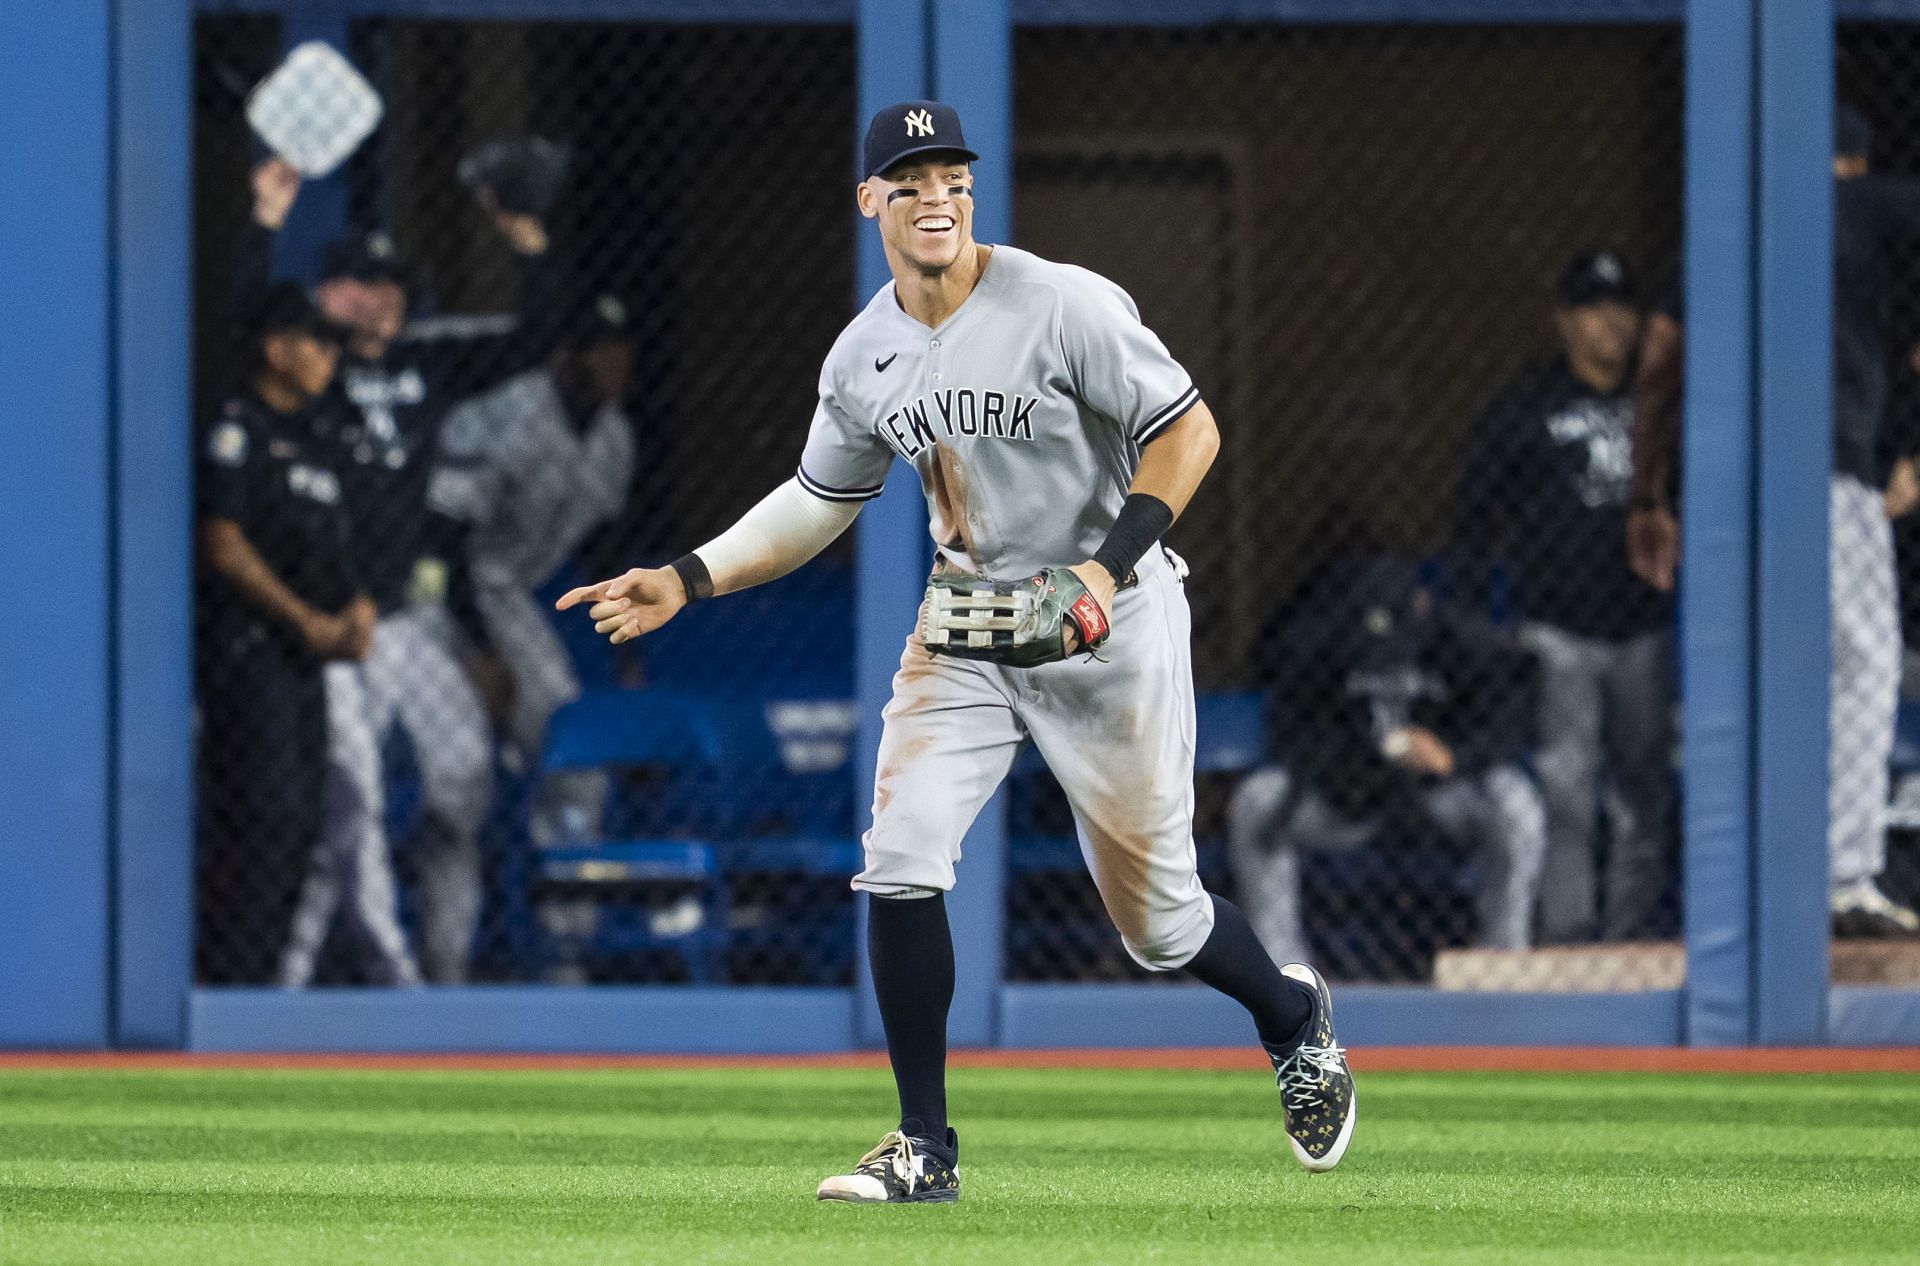 Pickswise on X: Aaron Judge rocking a New York or Nowhere